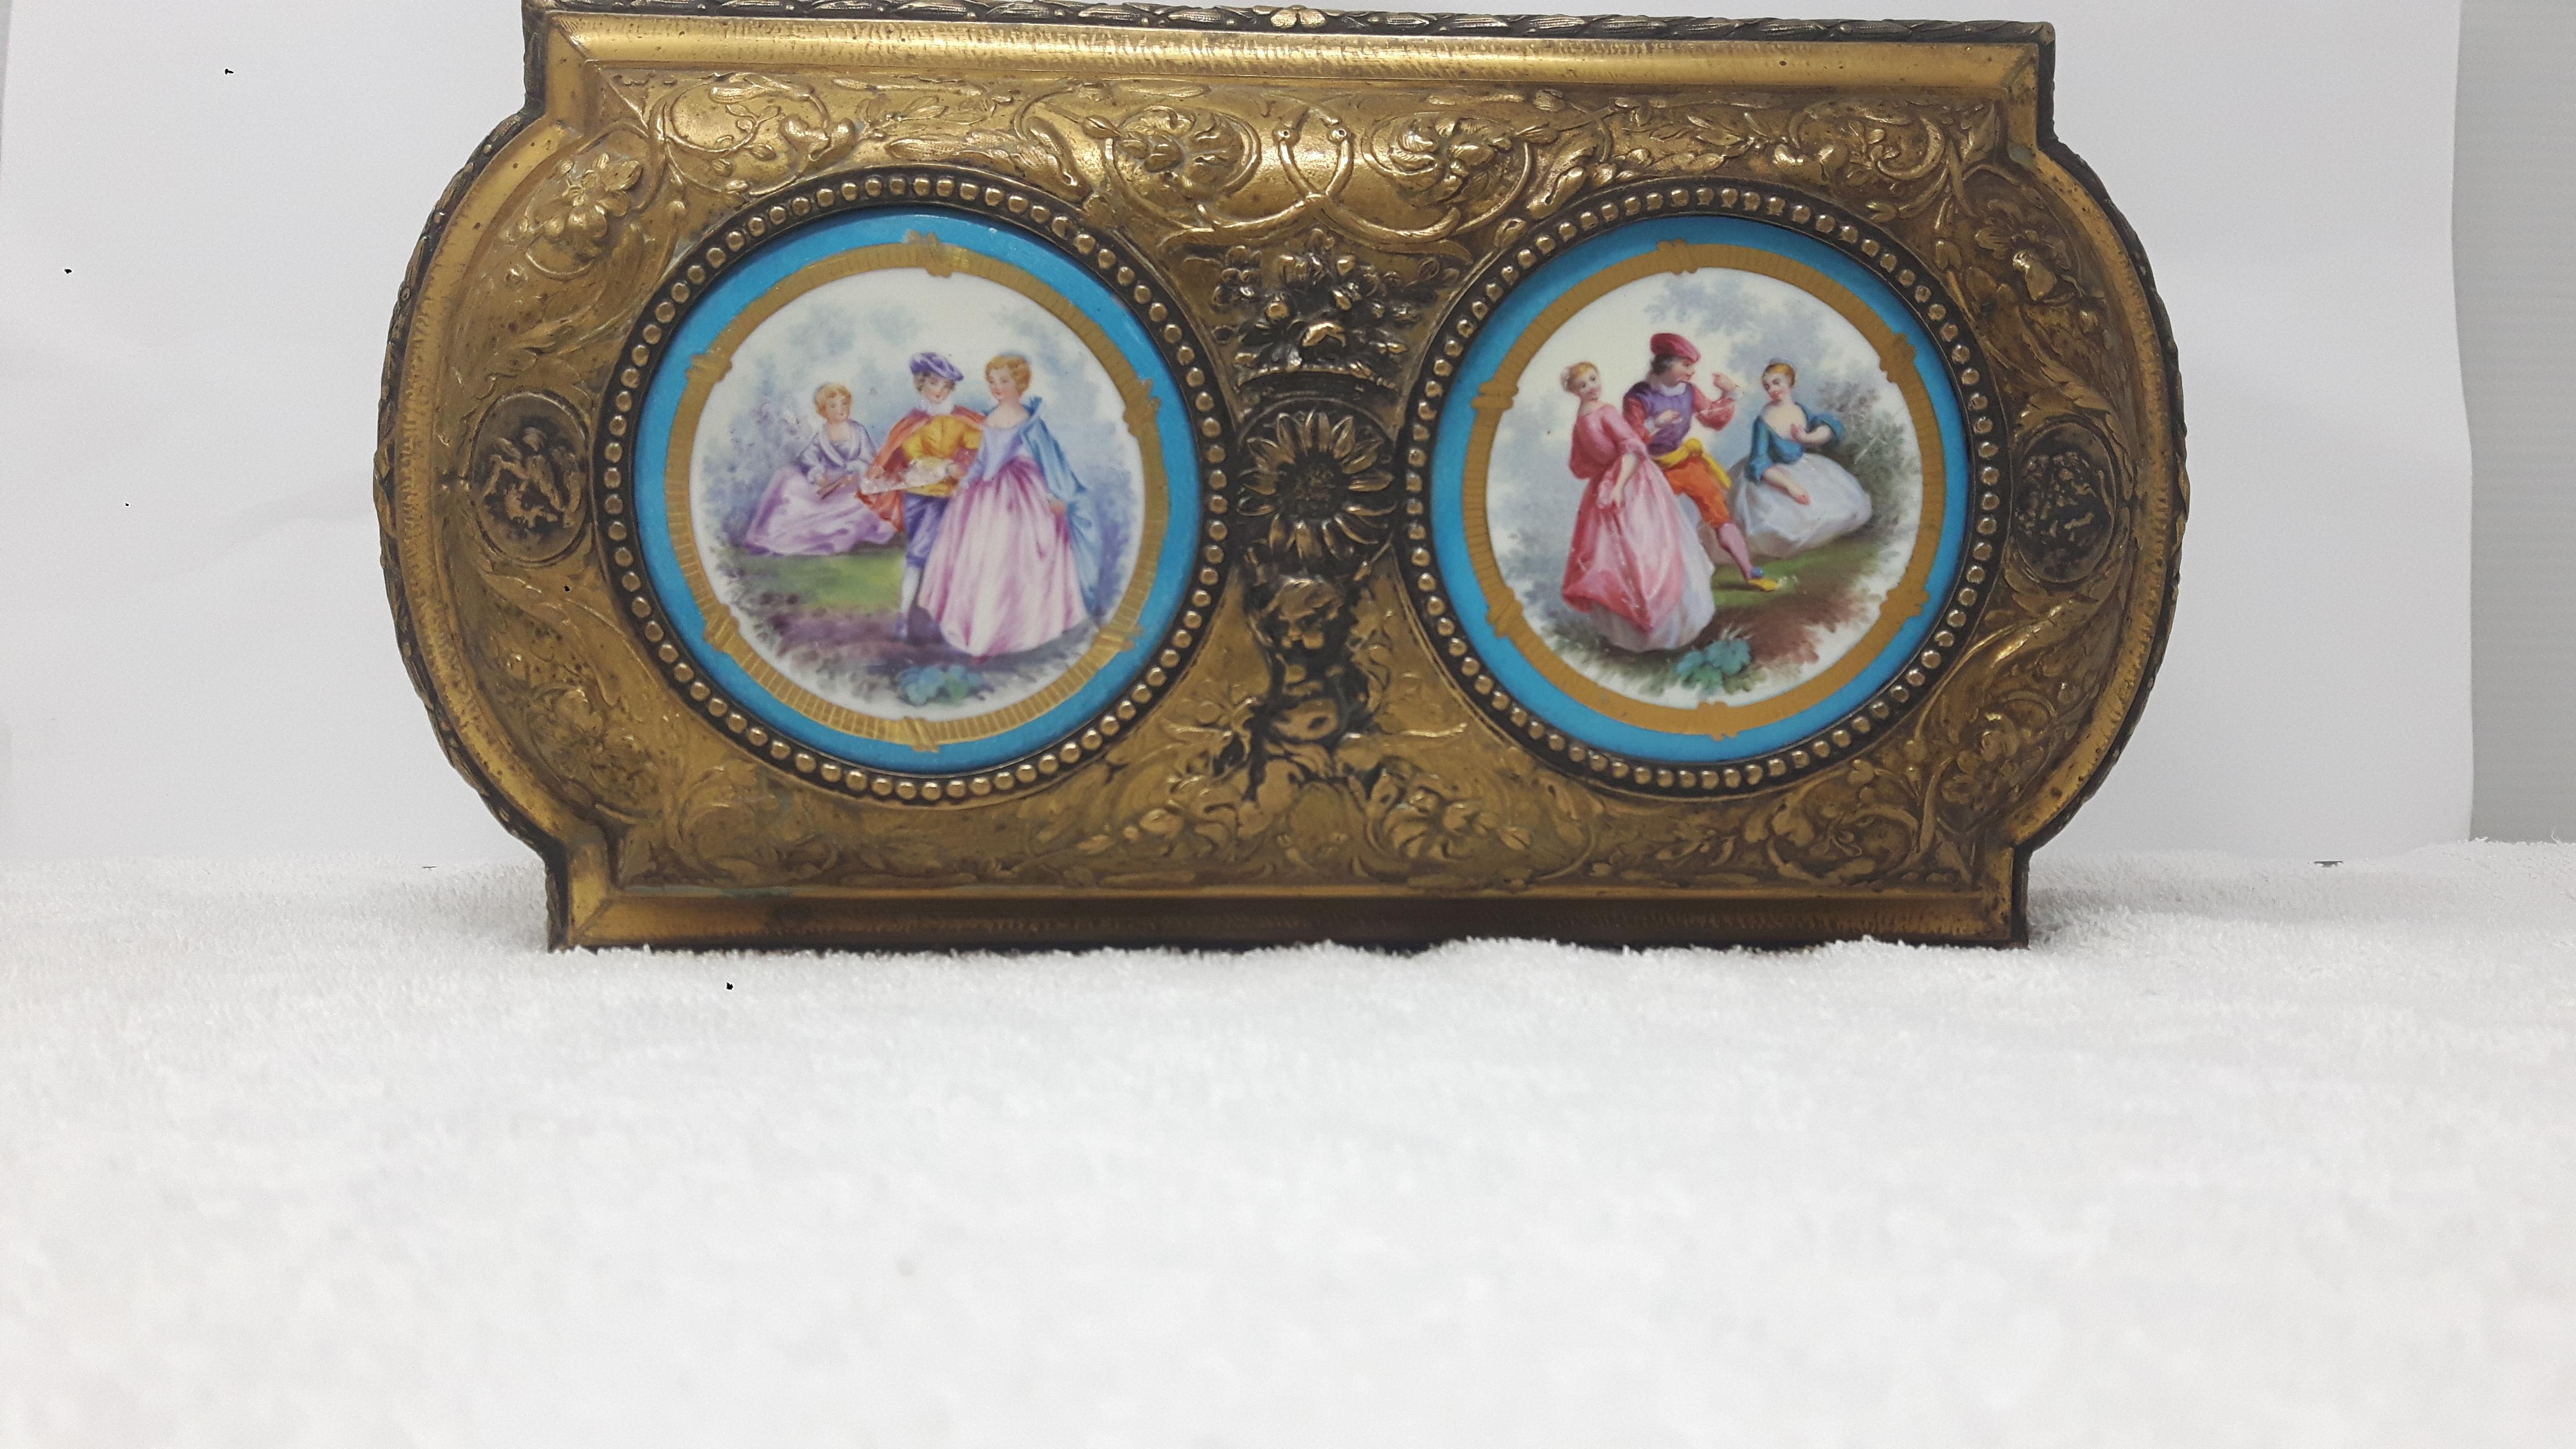 19th century French Sevres style ormolu and porcelain casket having
light blue ground, painted with panels of romantic scenes.